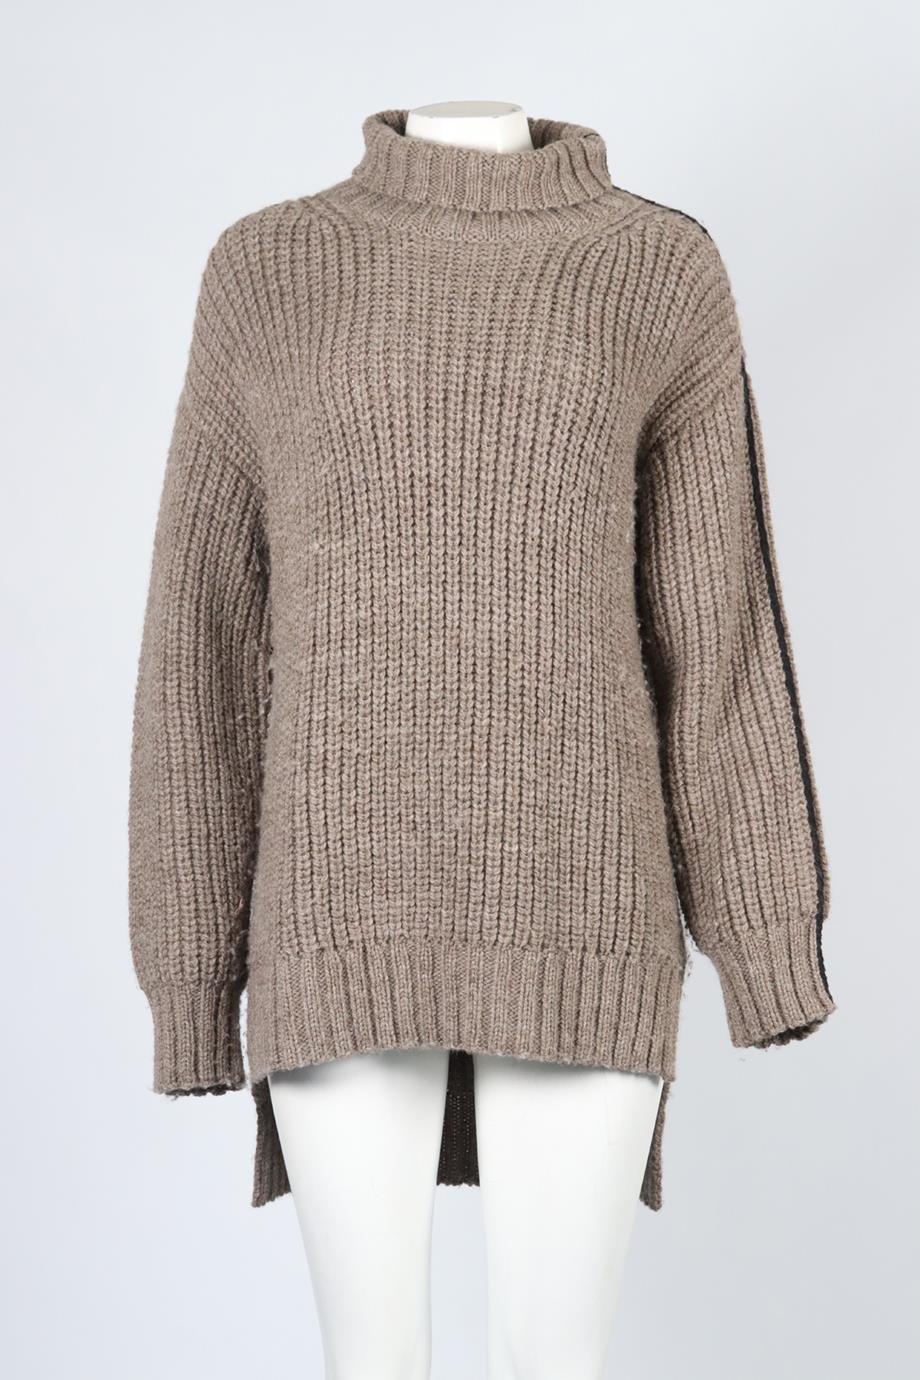 PETER DO WOOL TURTLENECK SWEATER SMALL